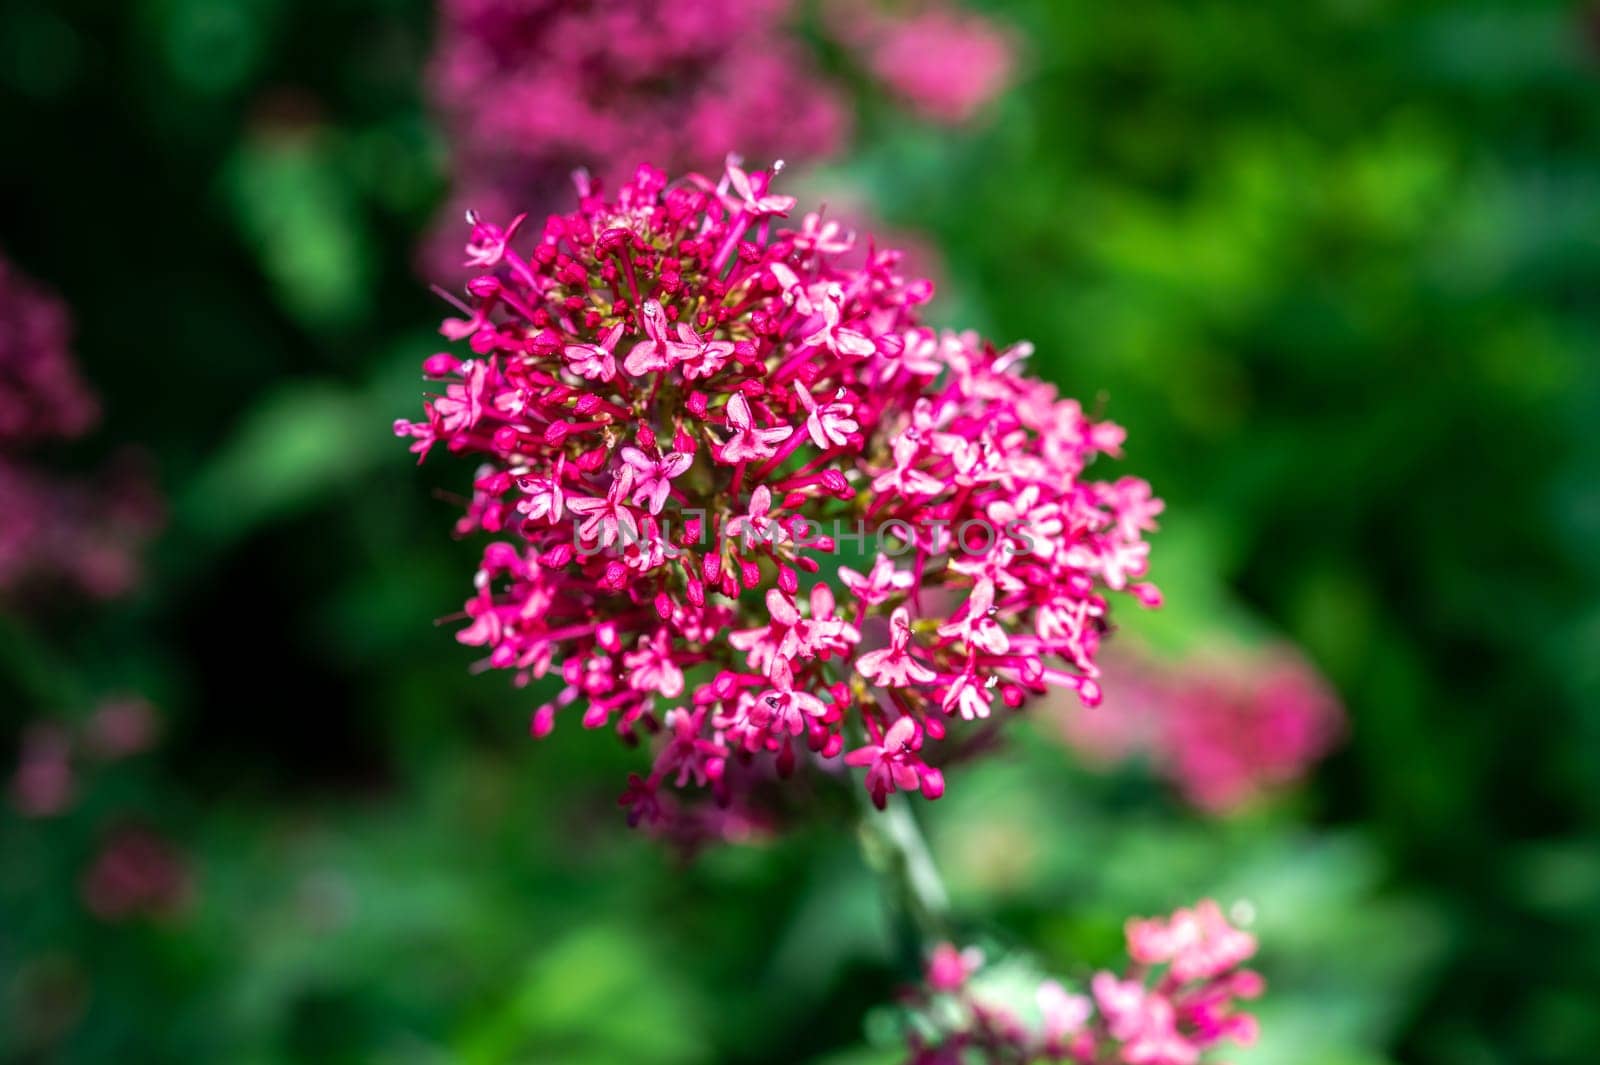 Blooming red valeriana flowers on a green leaves background by Multipedia